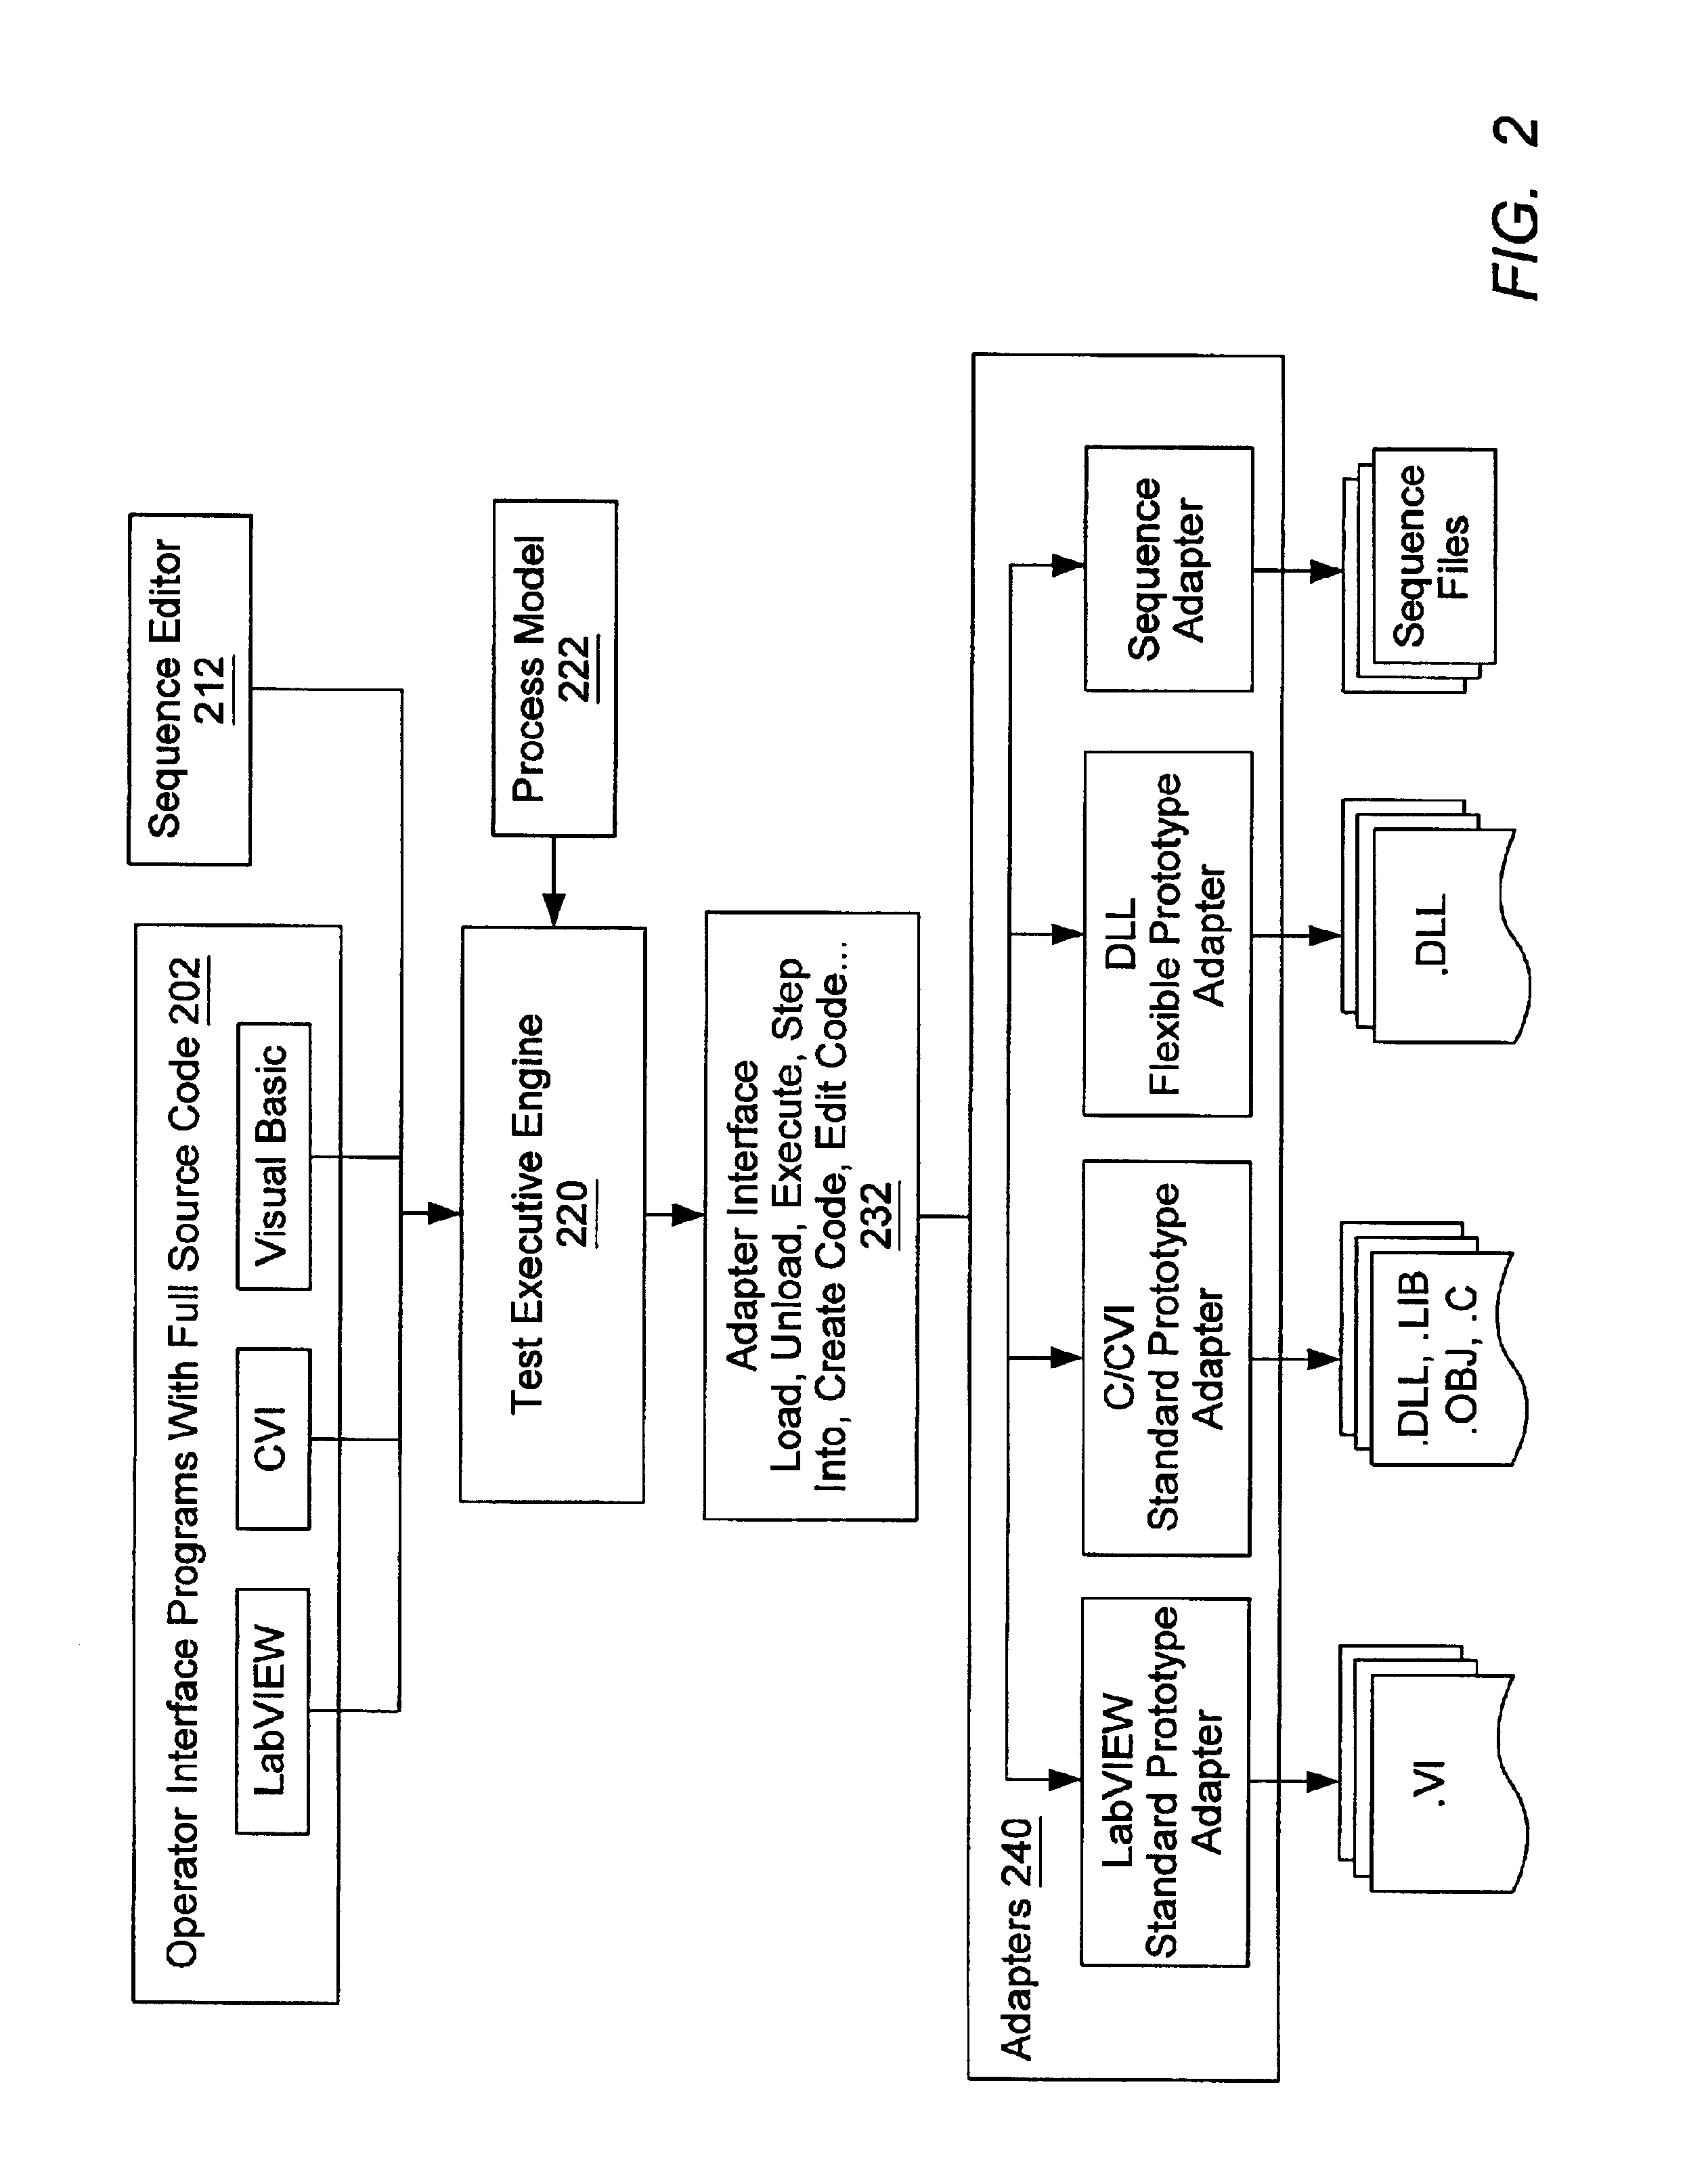 System and method for testing a group of related products